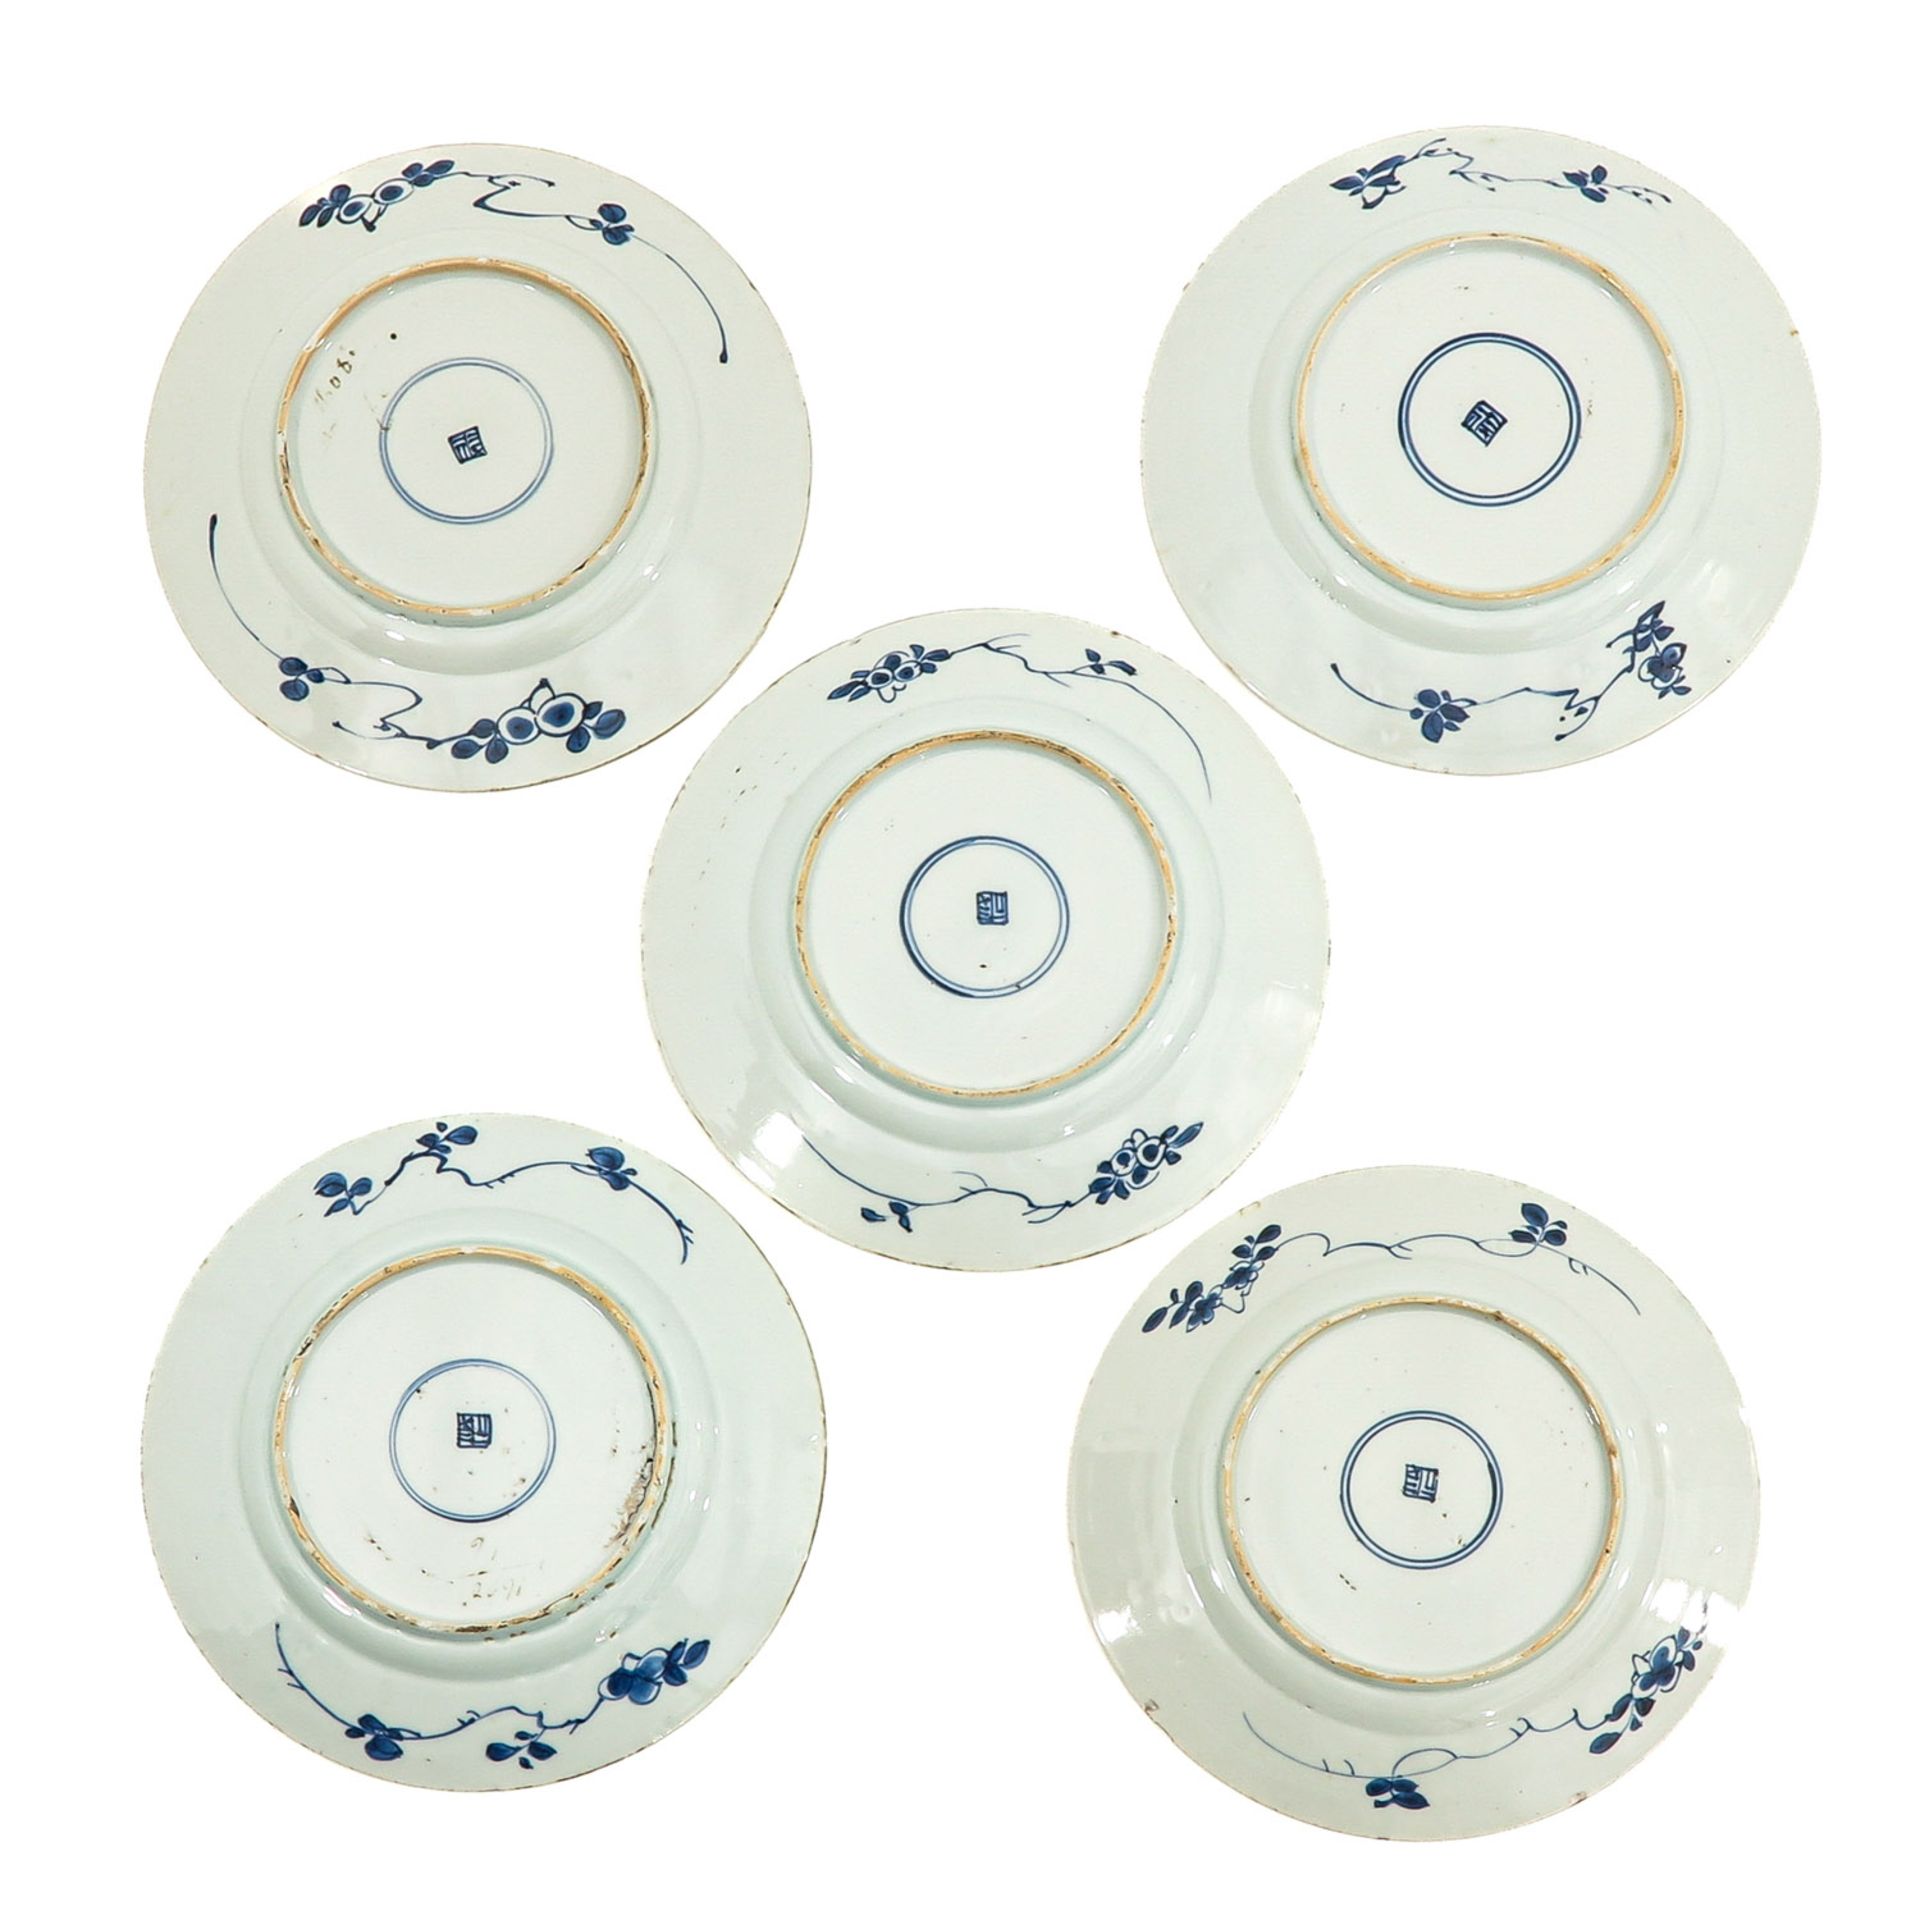 A Series of 5 Blue and White Plates - Bild 2 aus 10